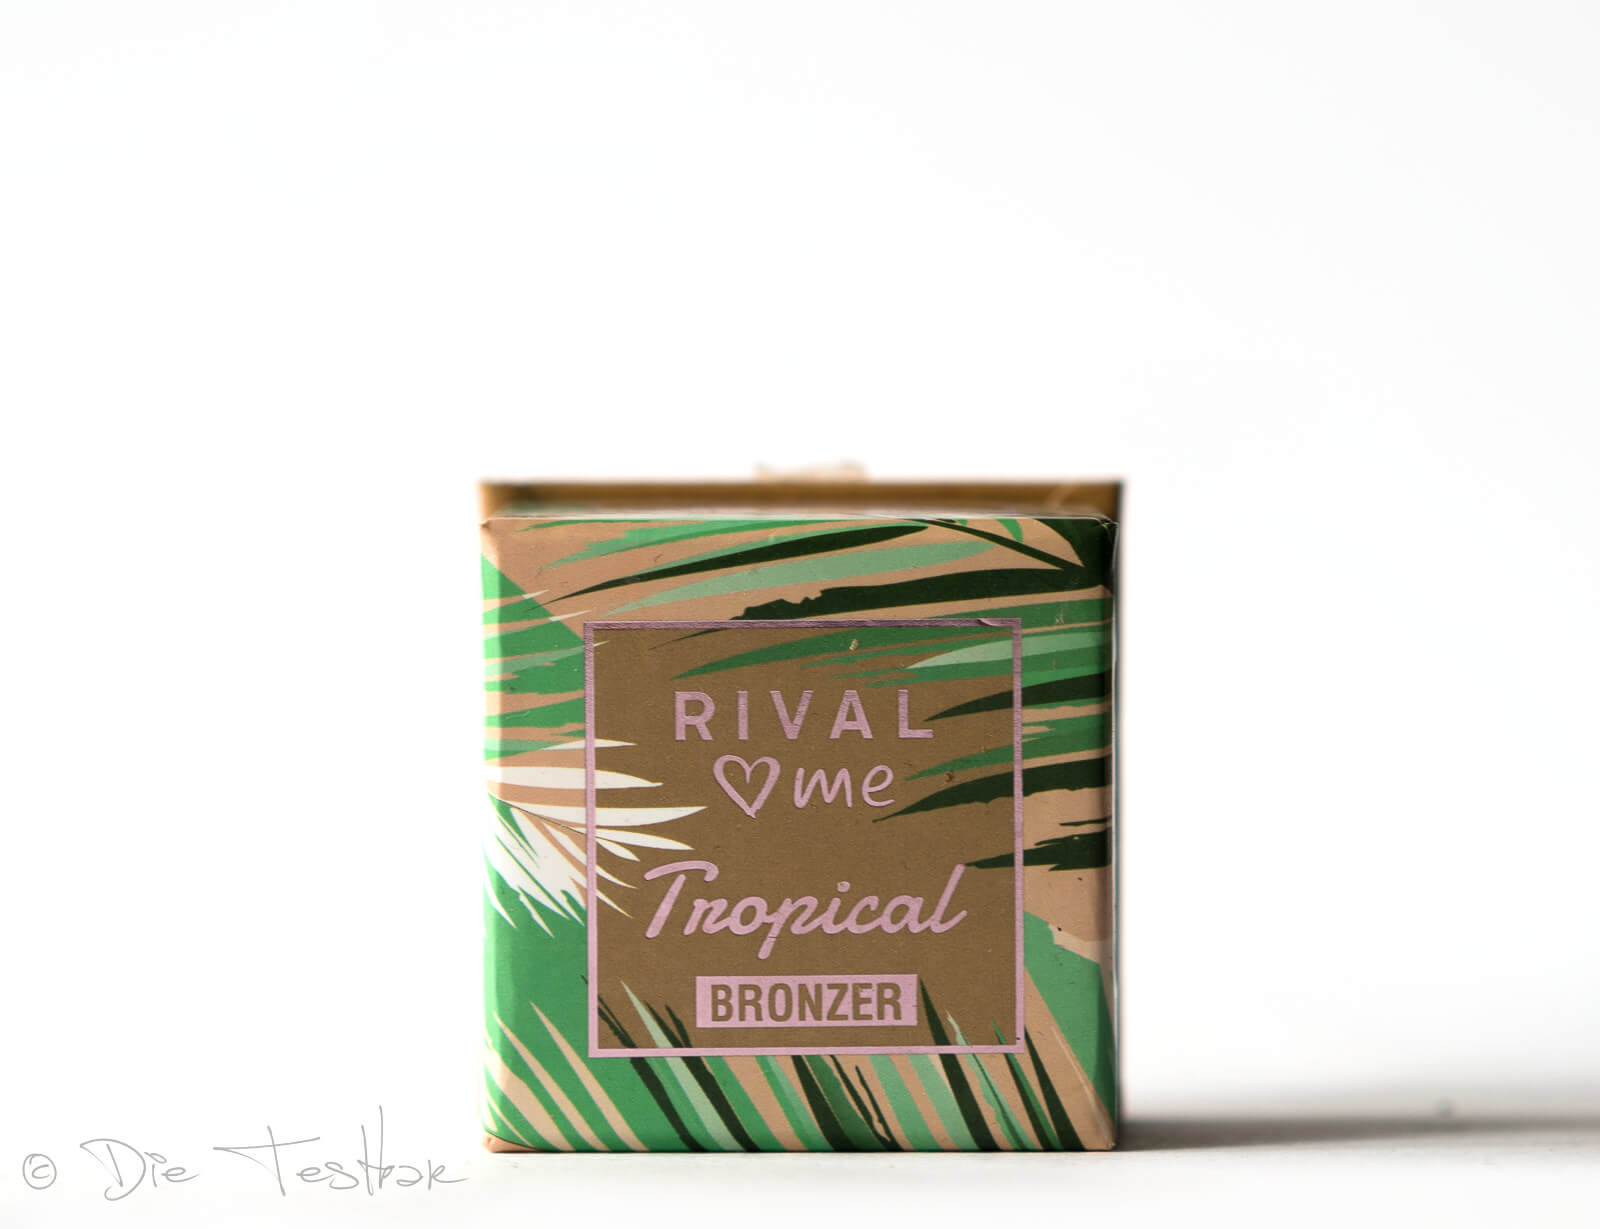 Review – RIVAL loves me – Tropical Bronzer